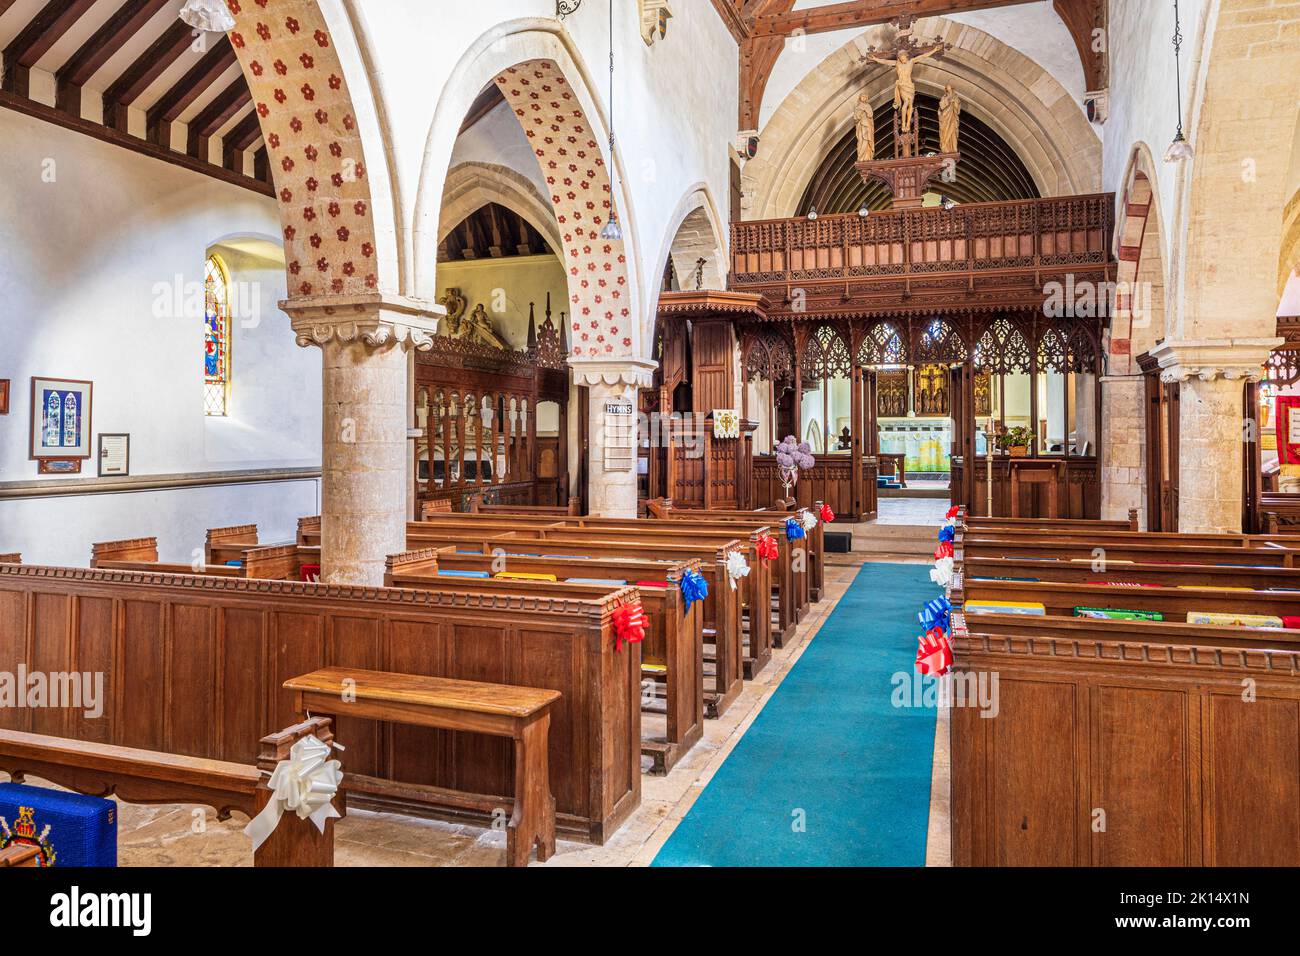 The interior of All Saints church in the Cotswold village of Down Ampney, Gloucestershire UK. Ralph Vaughan Williams was born in the Old Vicarage. Stock Photo